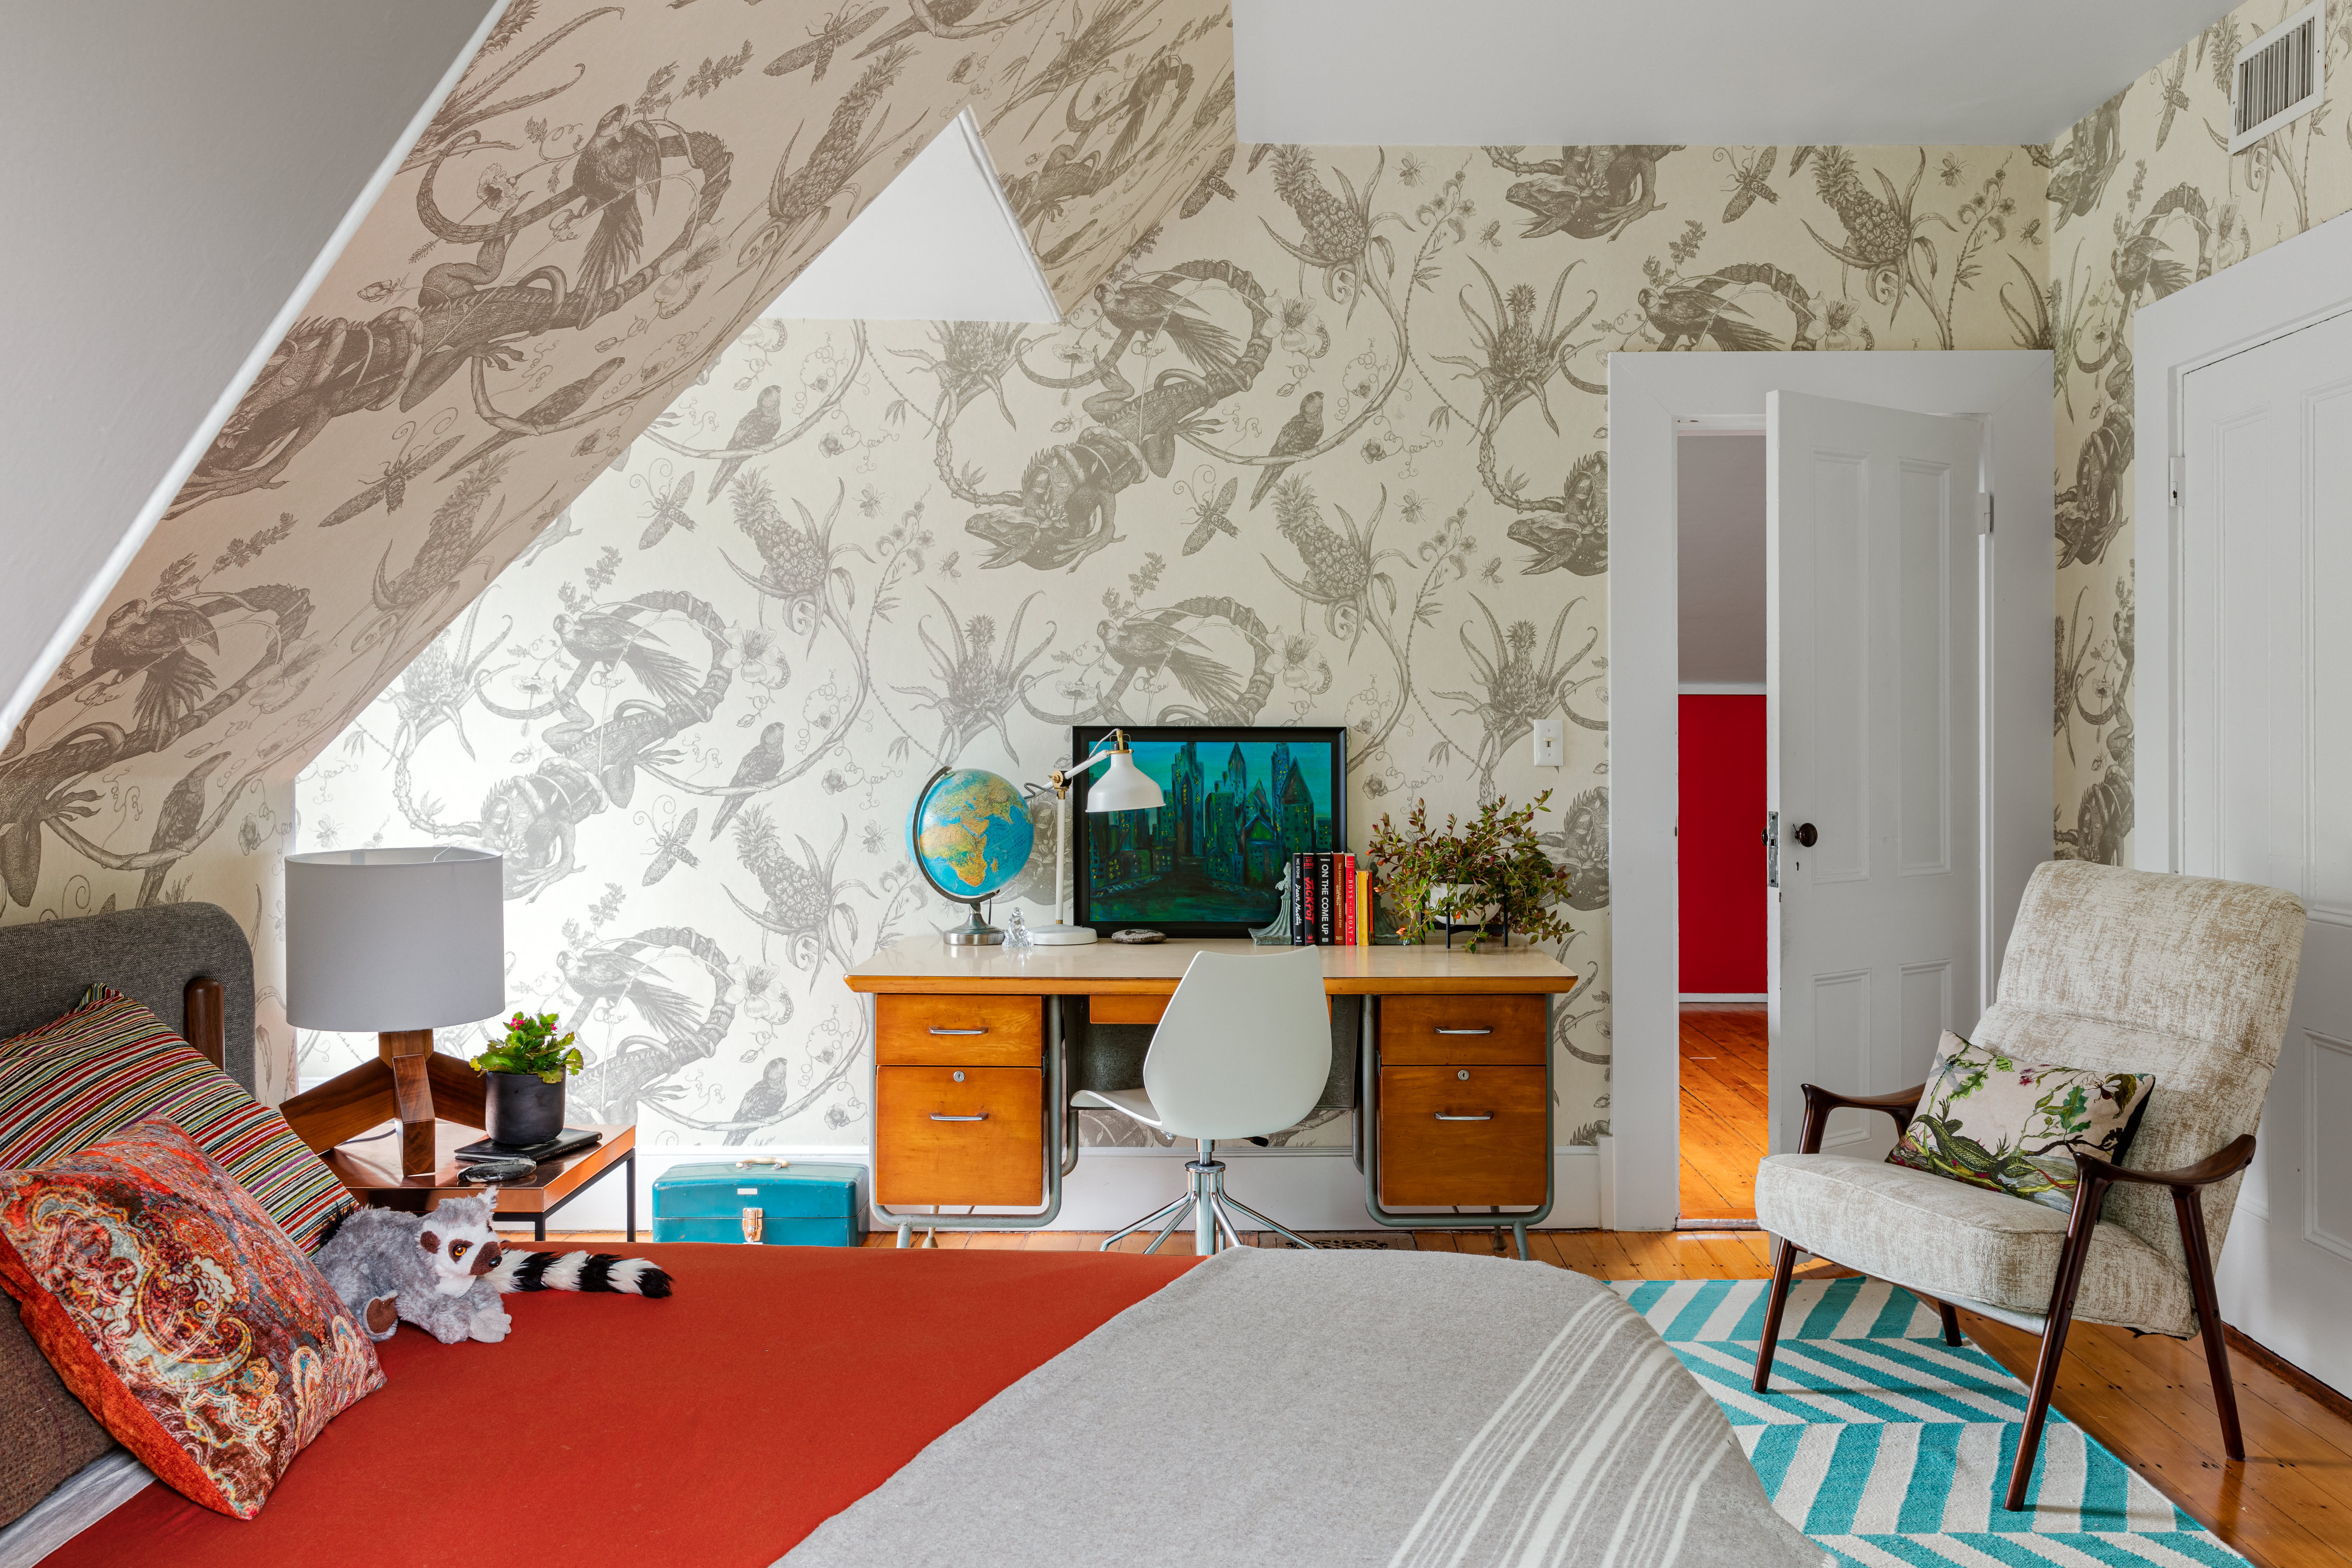 How Wallpaper Makes A Big Impact in Small Spaces  The Scott Brothers